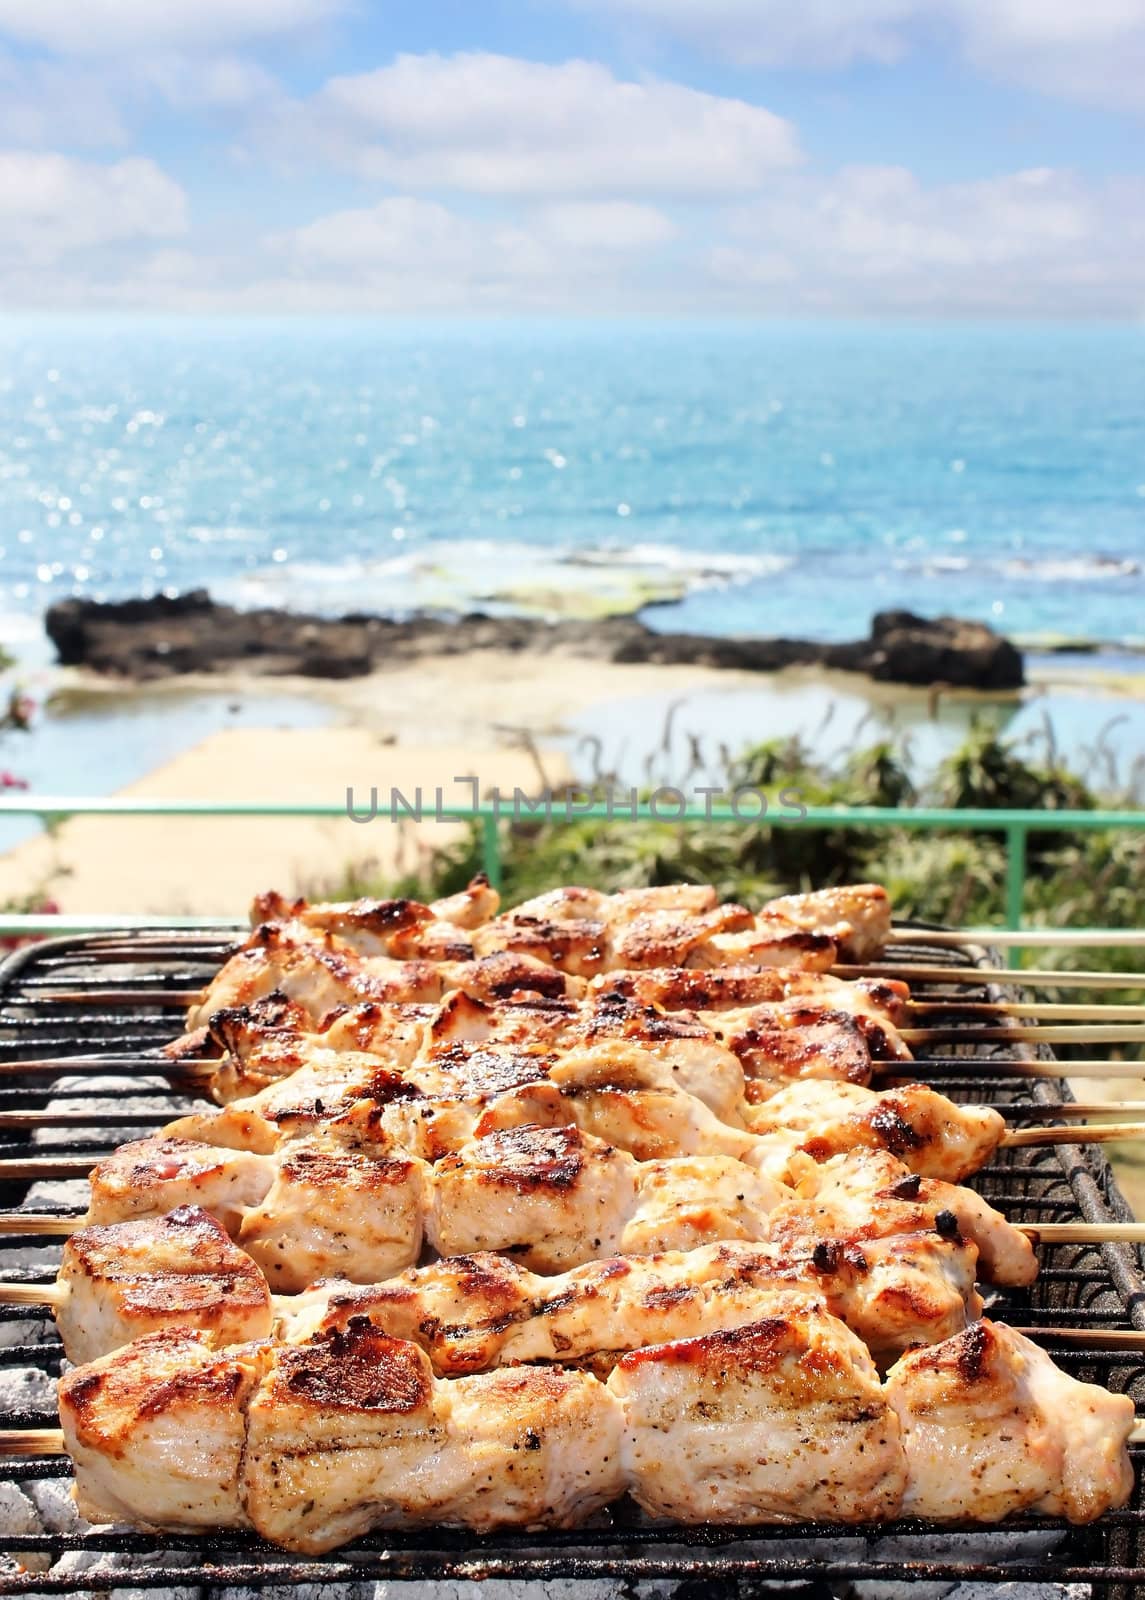 barbecues on the sea by irisphoto4